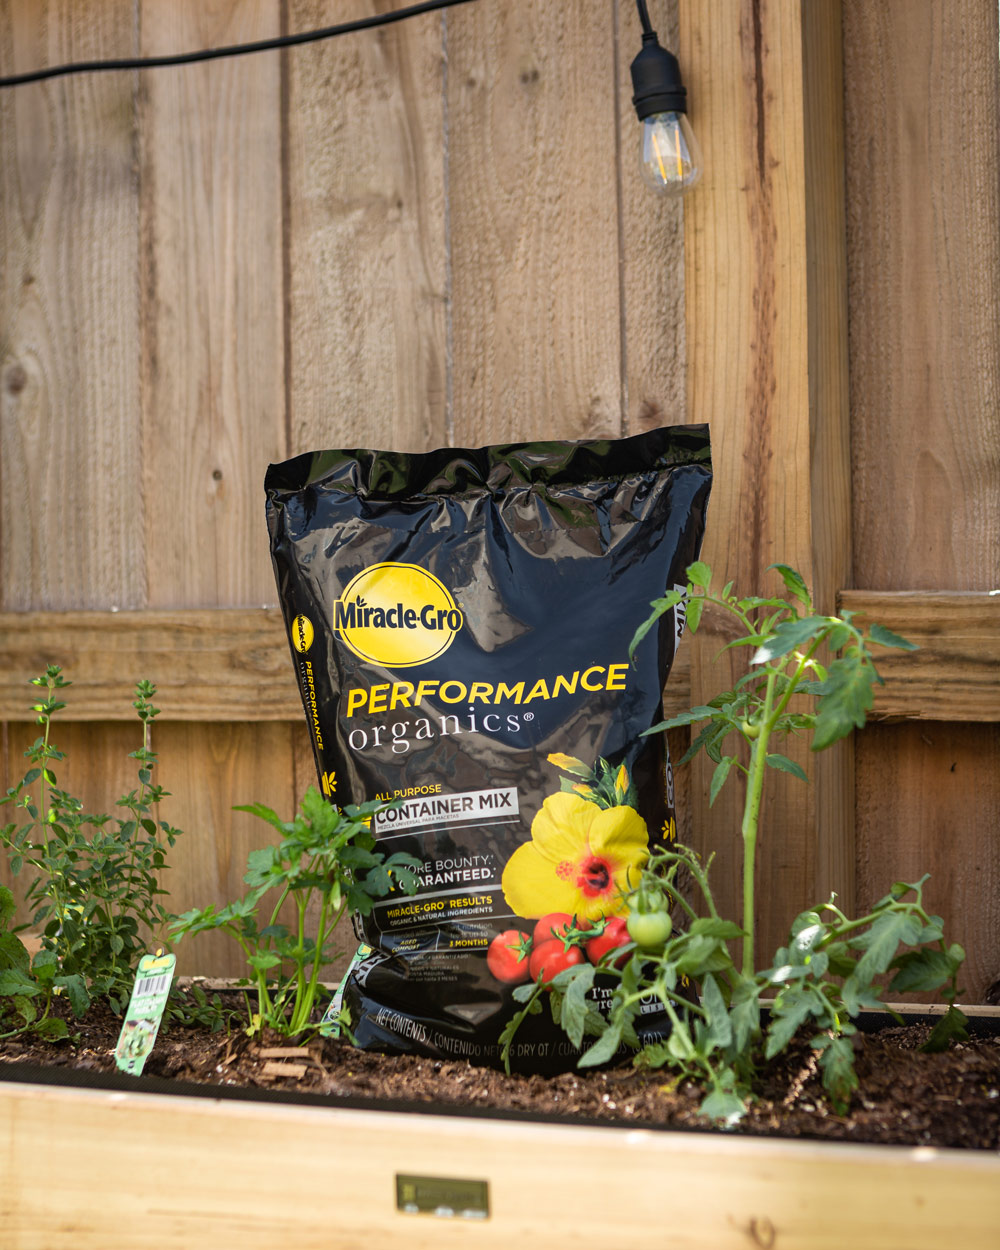 Bag of Miracle-Gro soil mix in a garden bed.